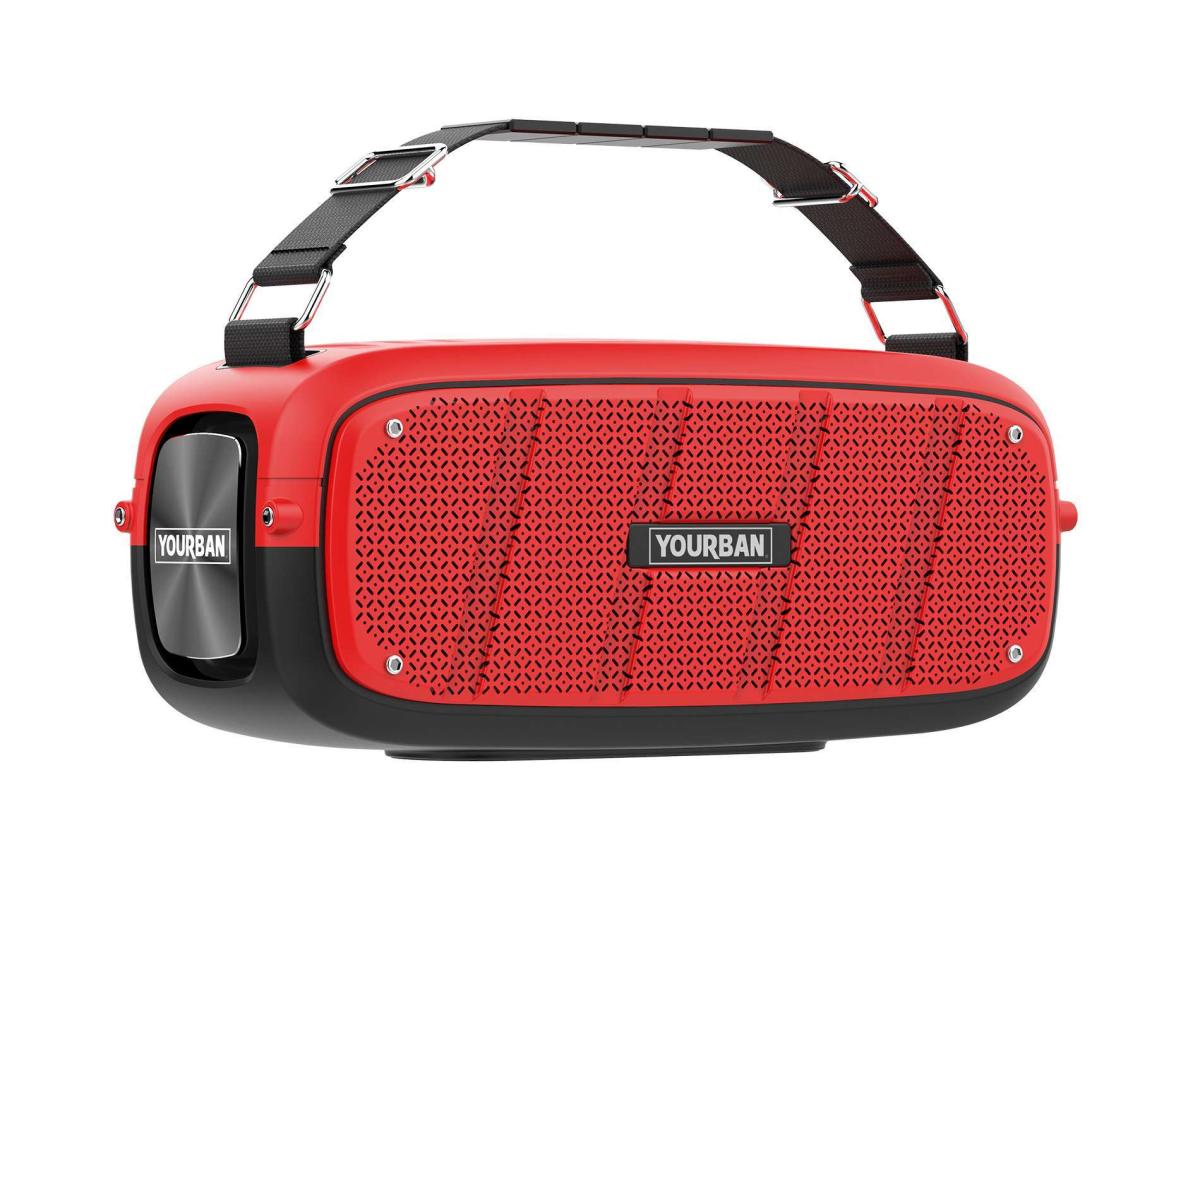 Enceinte nomade bluetooth compacte rouge - yourban